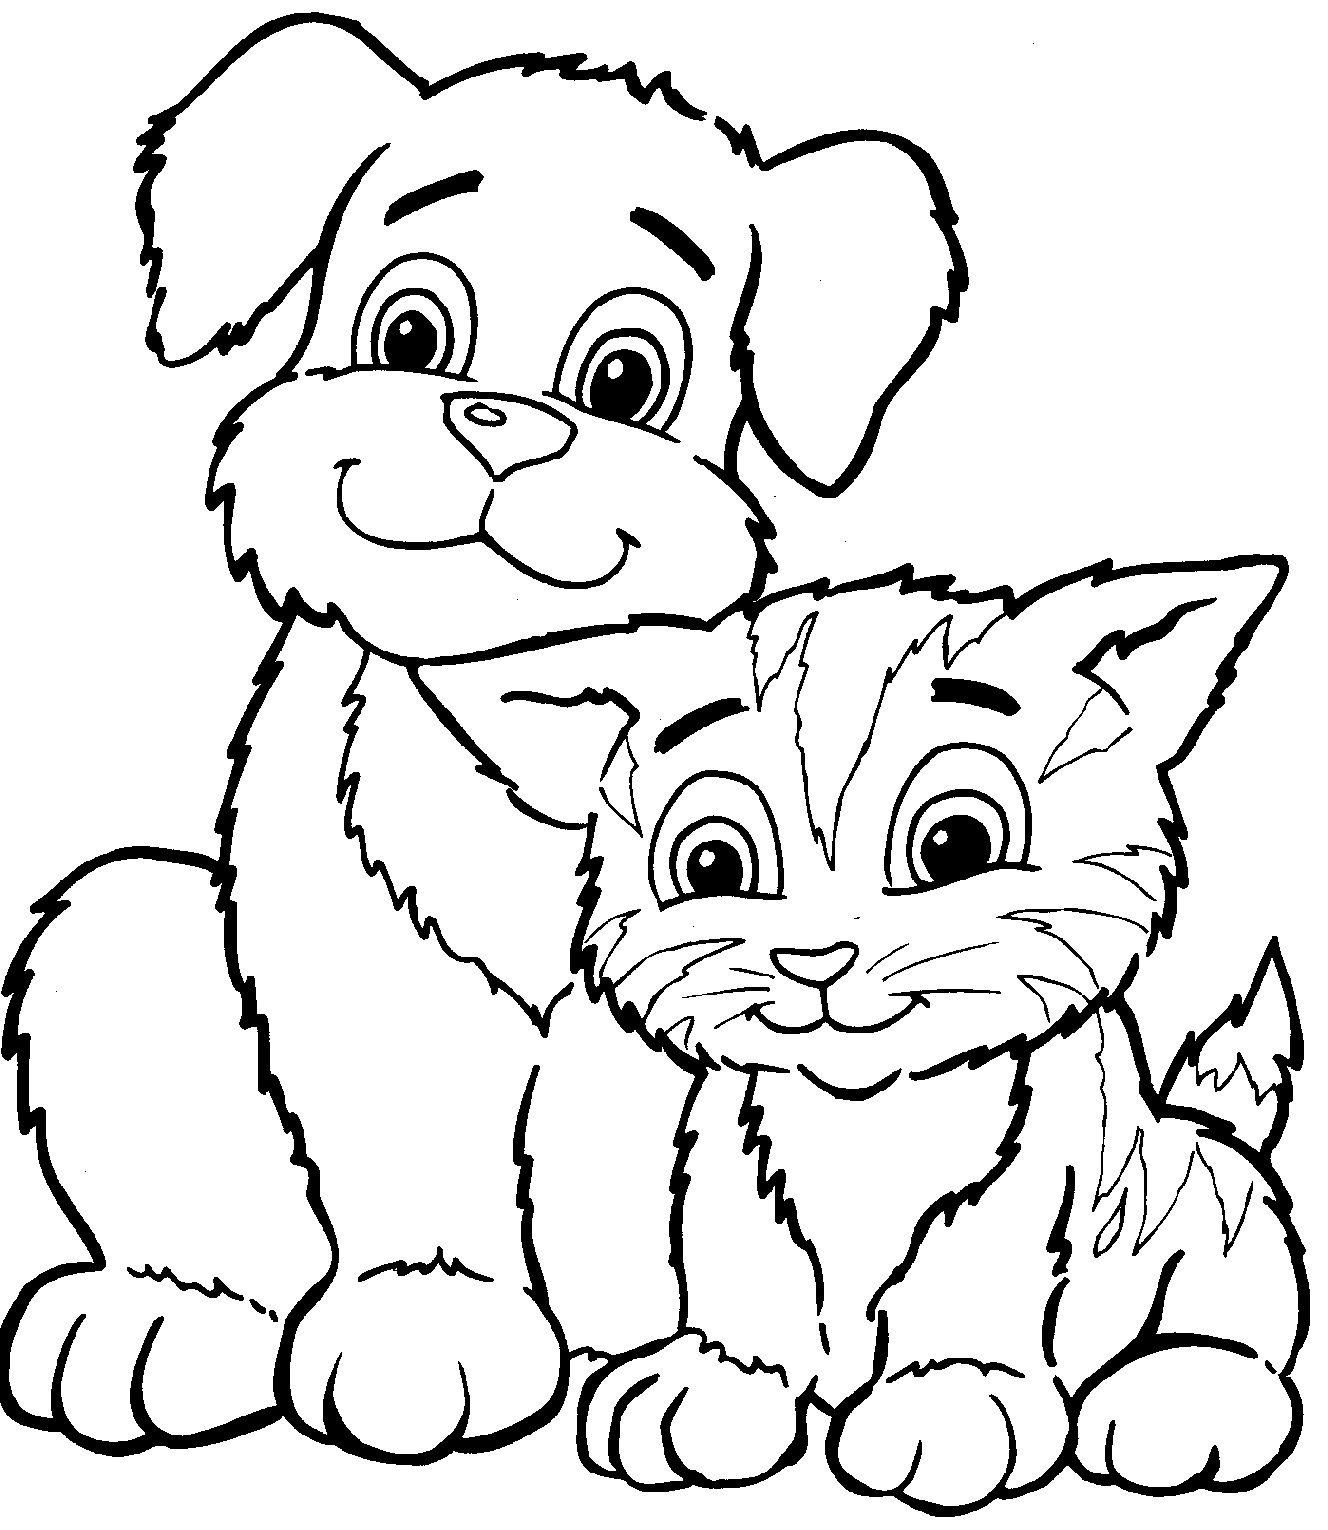 Dog And Cat Clipart Black And White Image Galleries   Imagekb Com